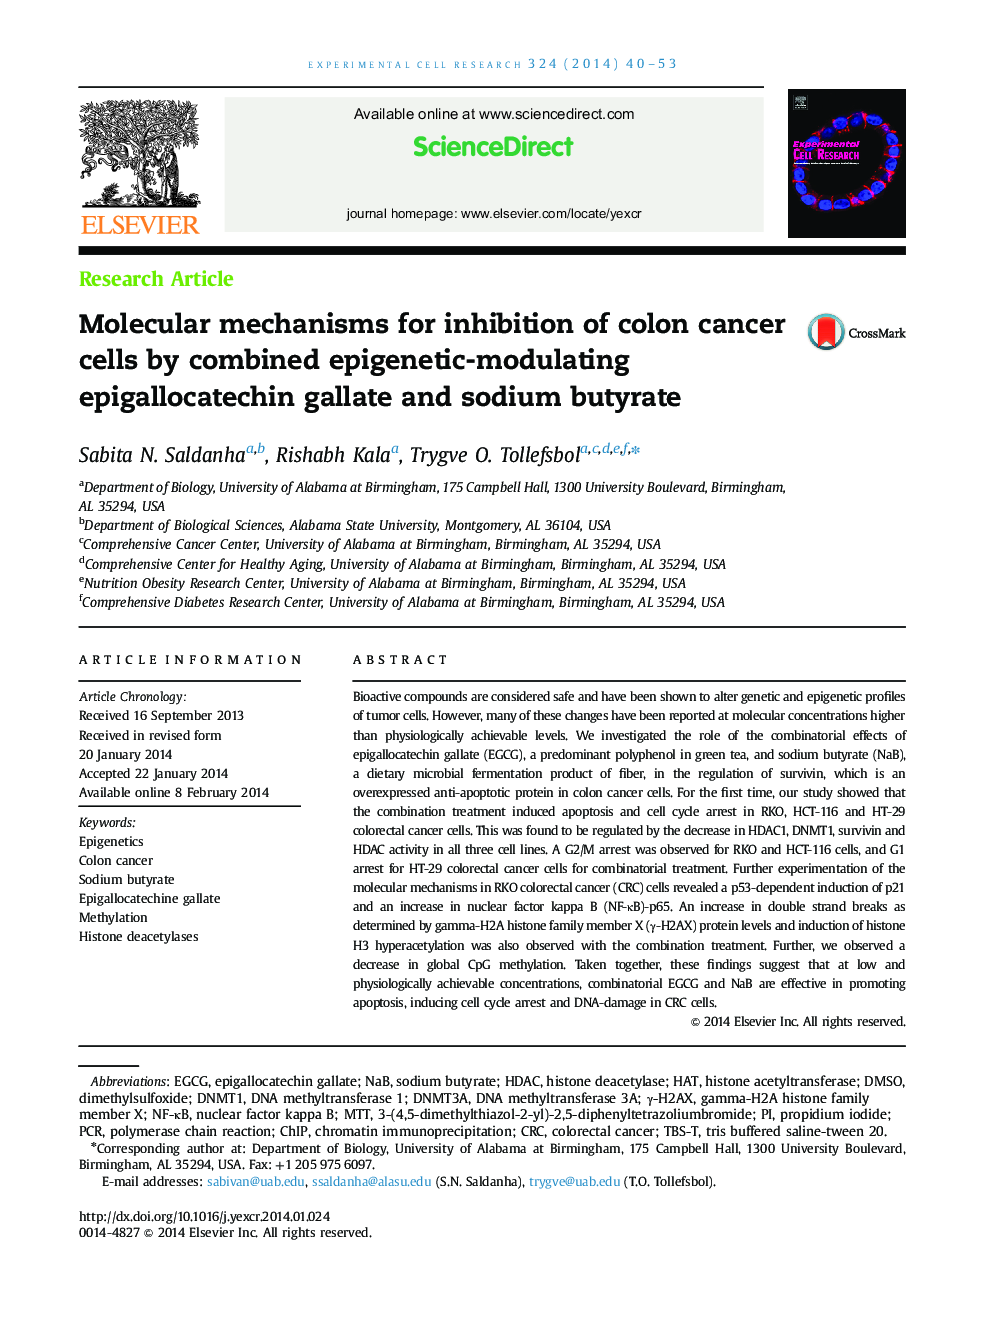 Molecular mechanisms for inhibition of colon cancer cells by combined epigenetic-modulating epigallocatechin gallate and sodium butyrate